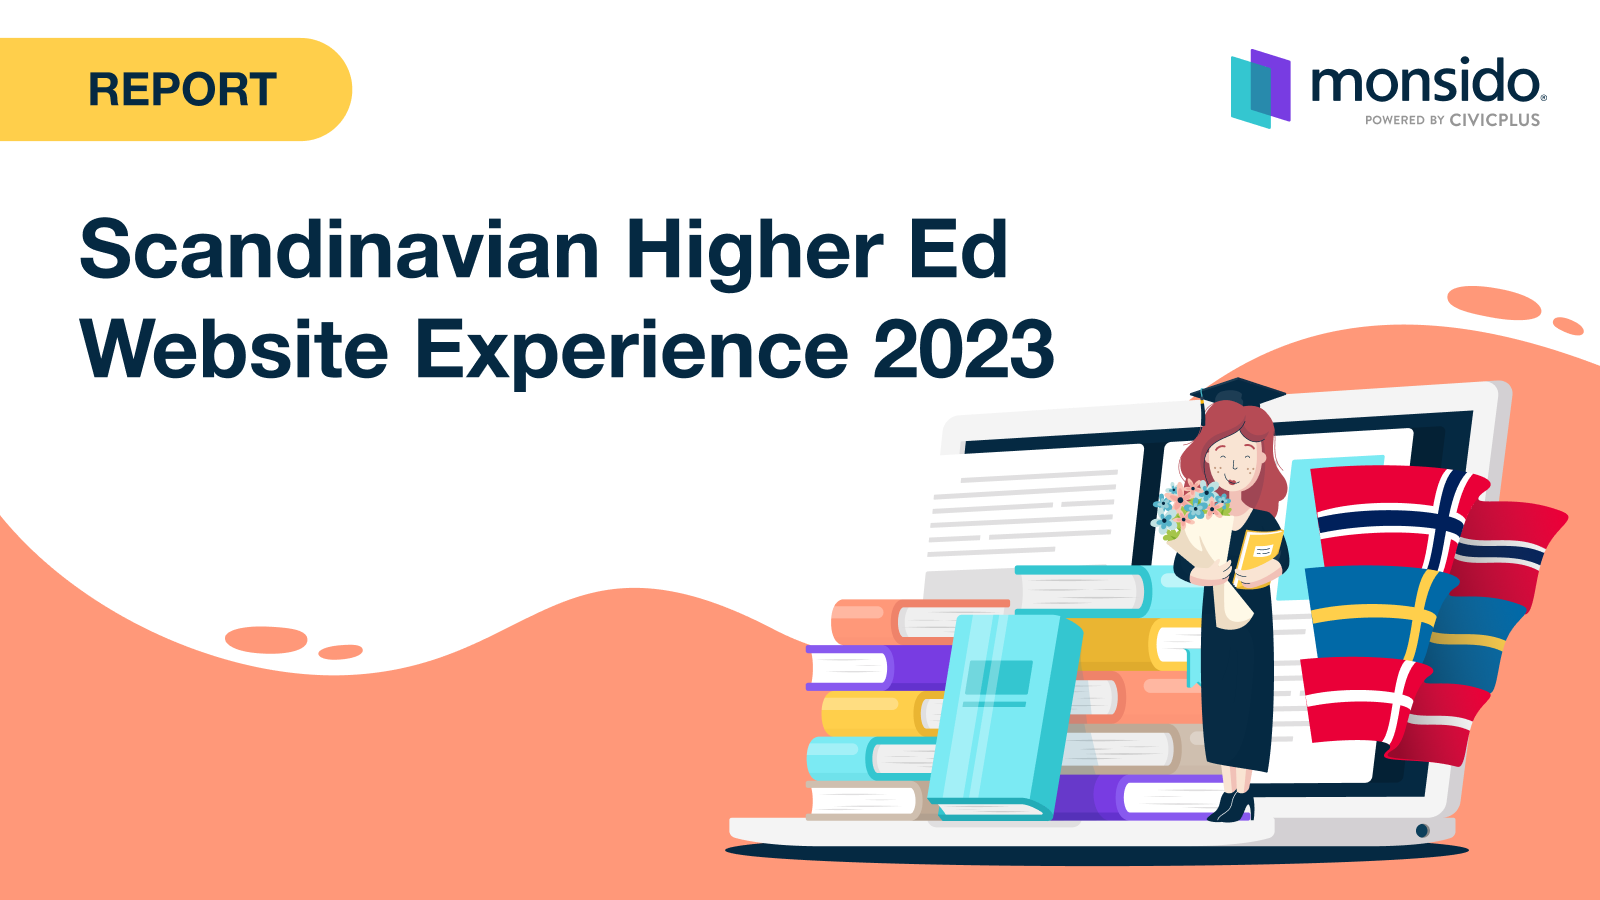 illustration of laptop, books, and man holding flag. Text overlaid: Scandinavian Higher-Ed Website Experience 2023